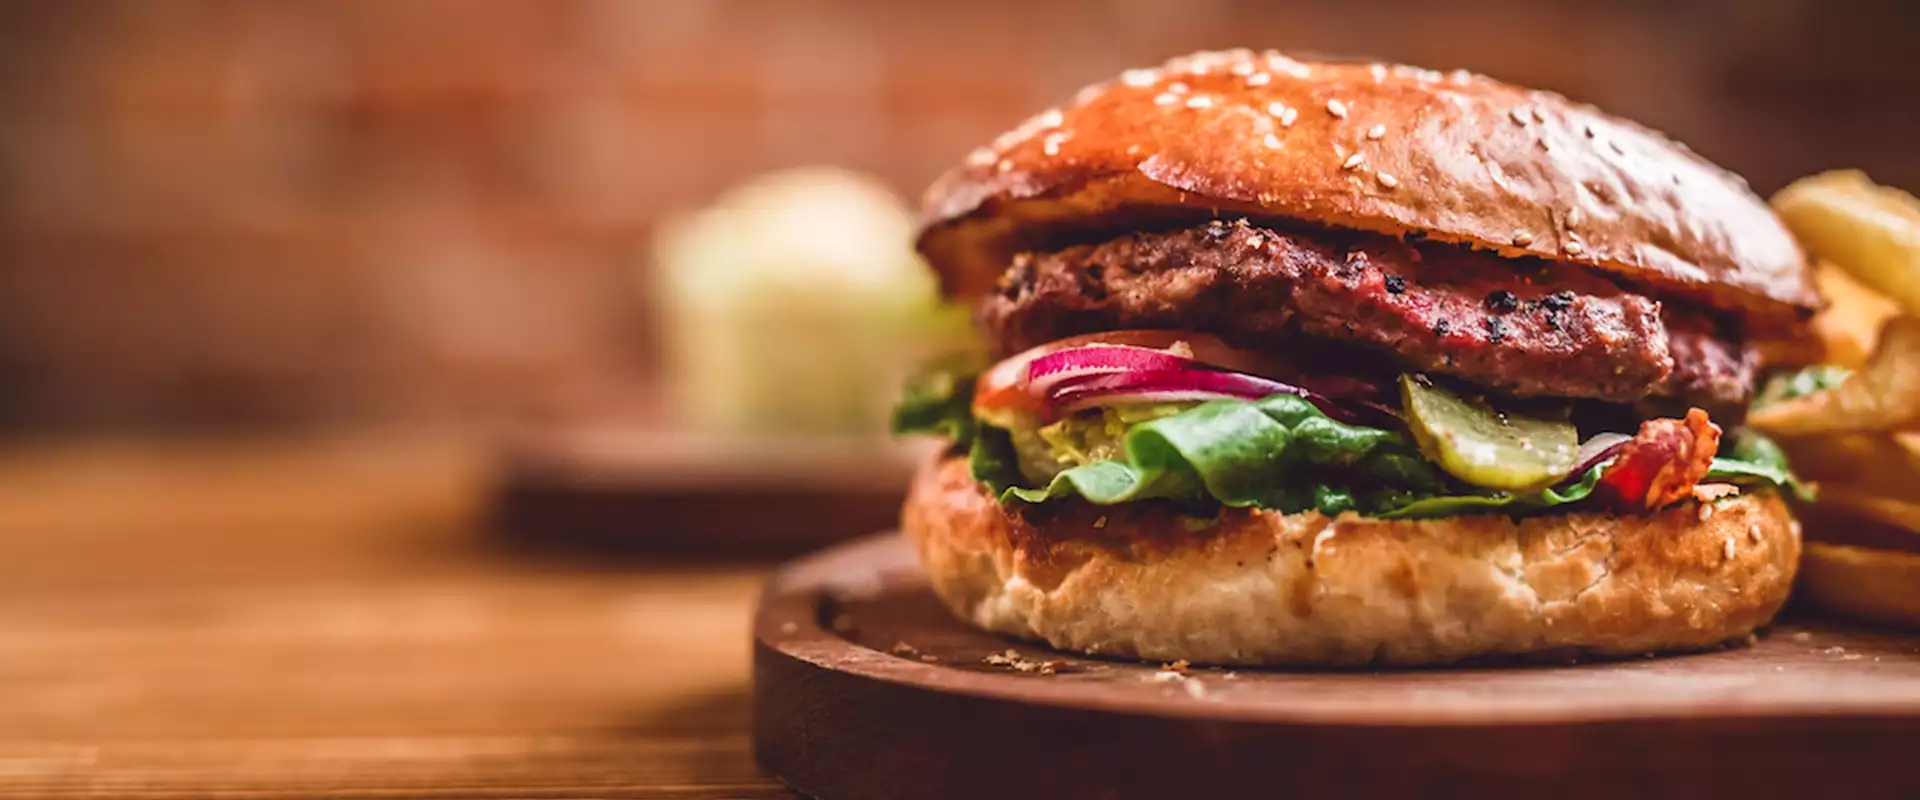 5 things you should know about London start-up Deliveroo - burger_wsg_banner